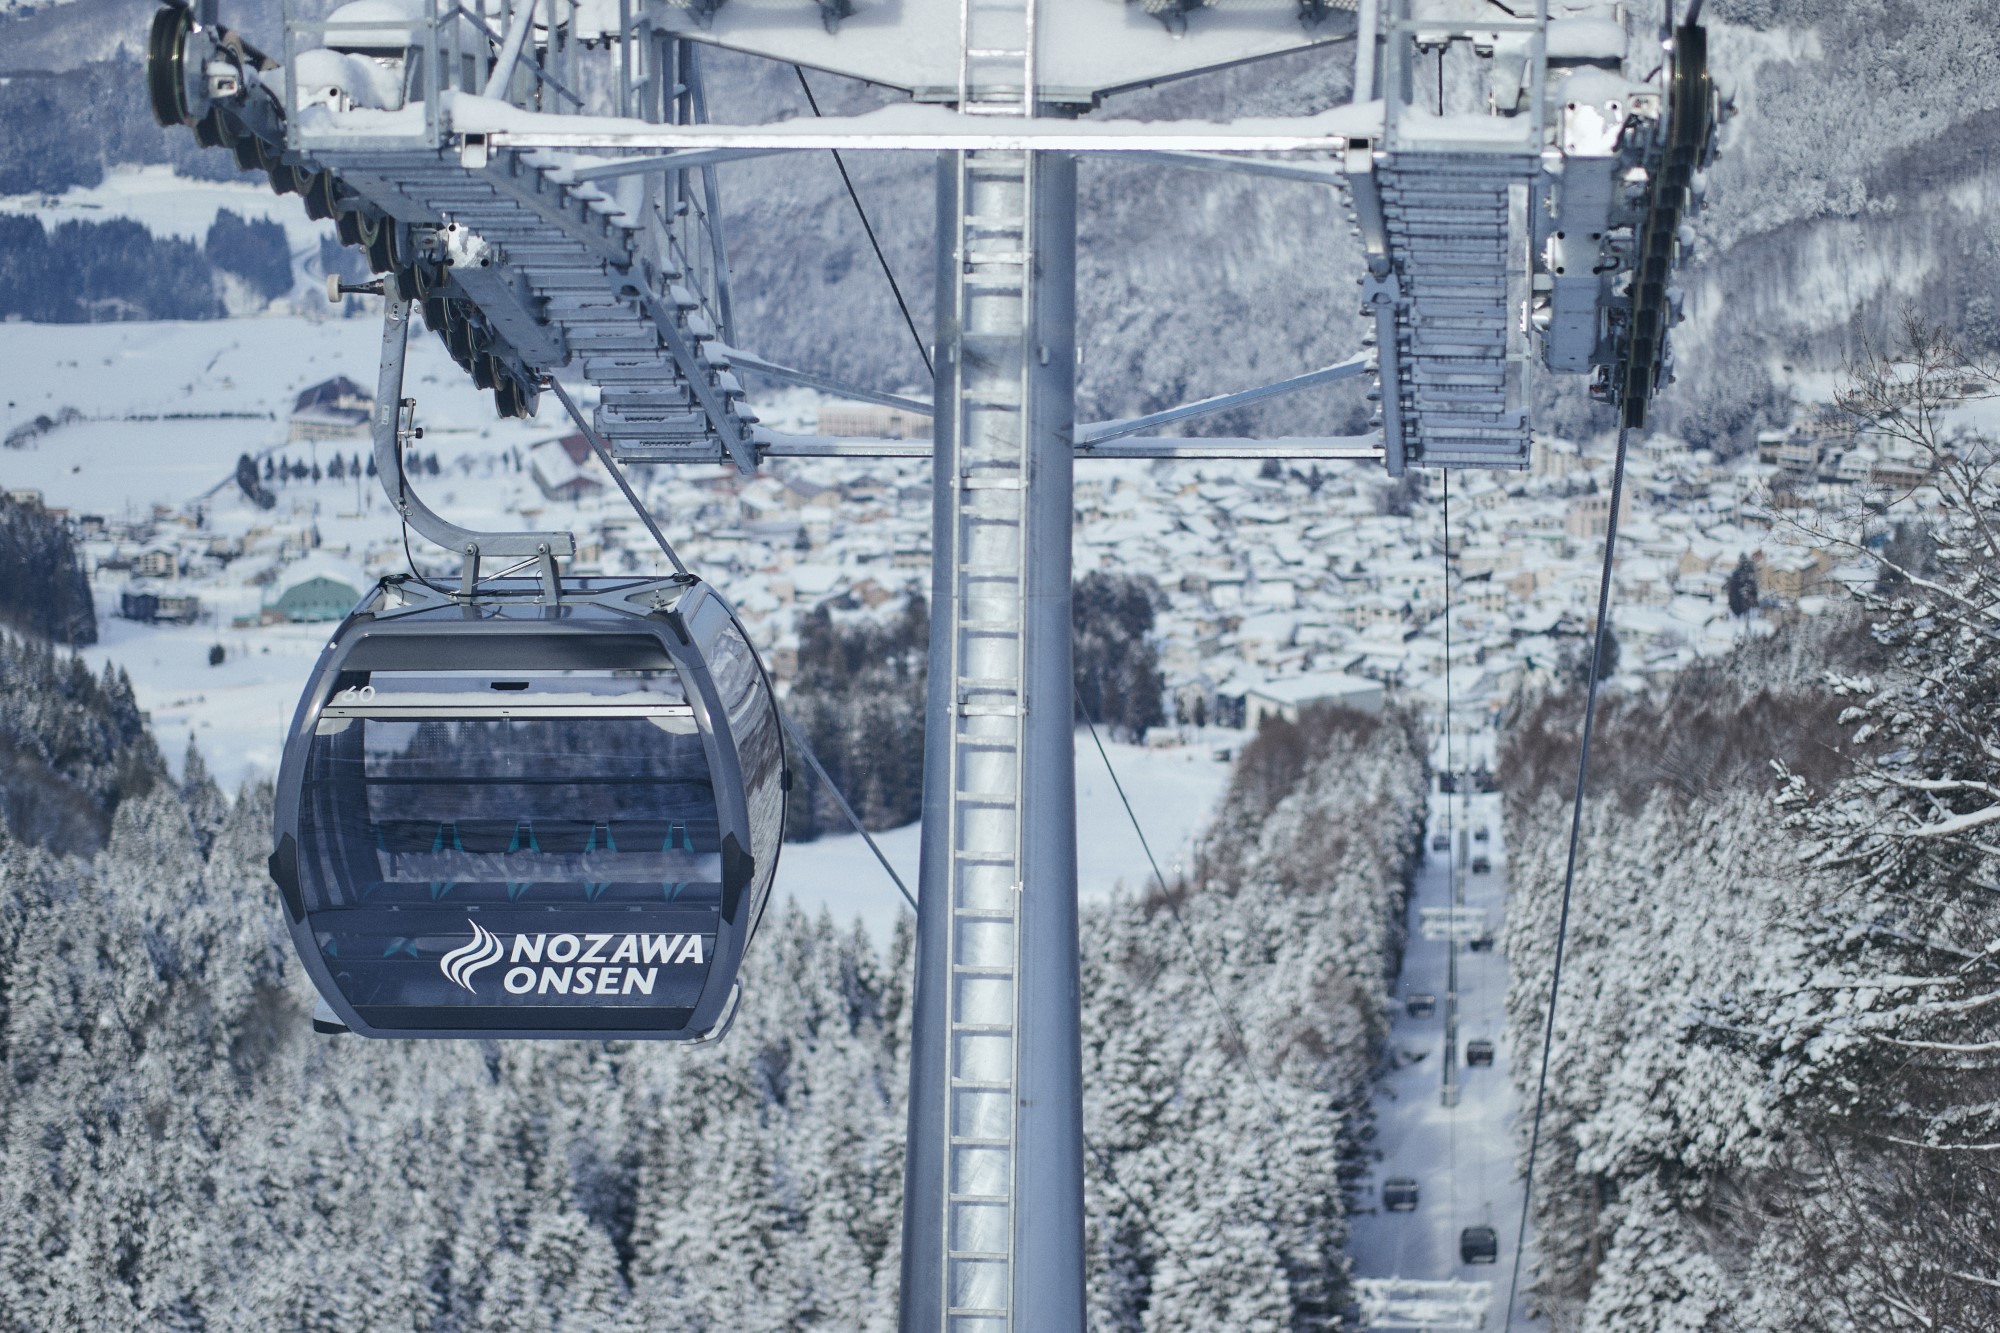 Ski slopes and lifts conditions